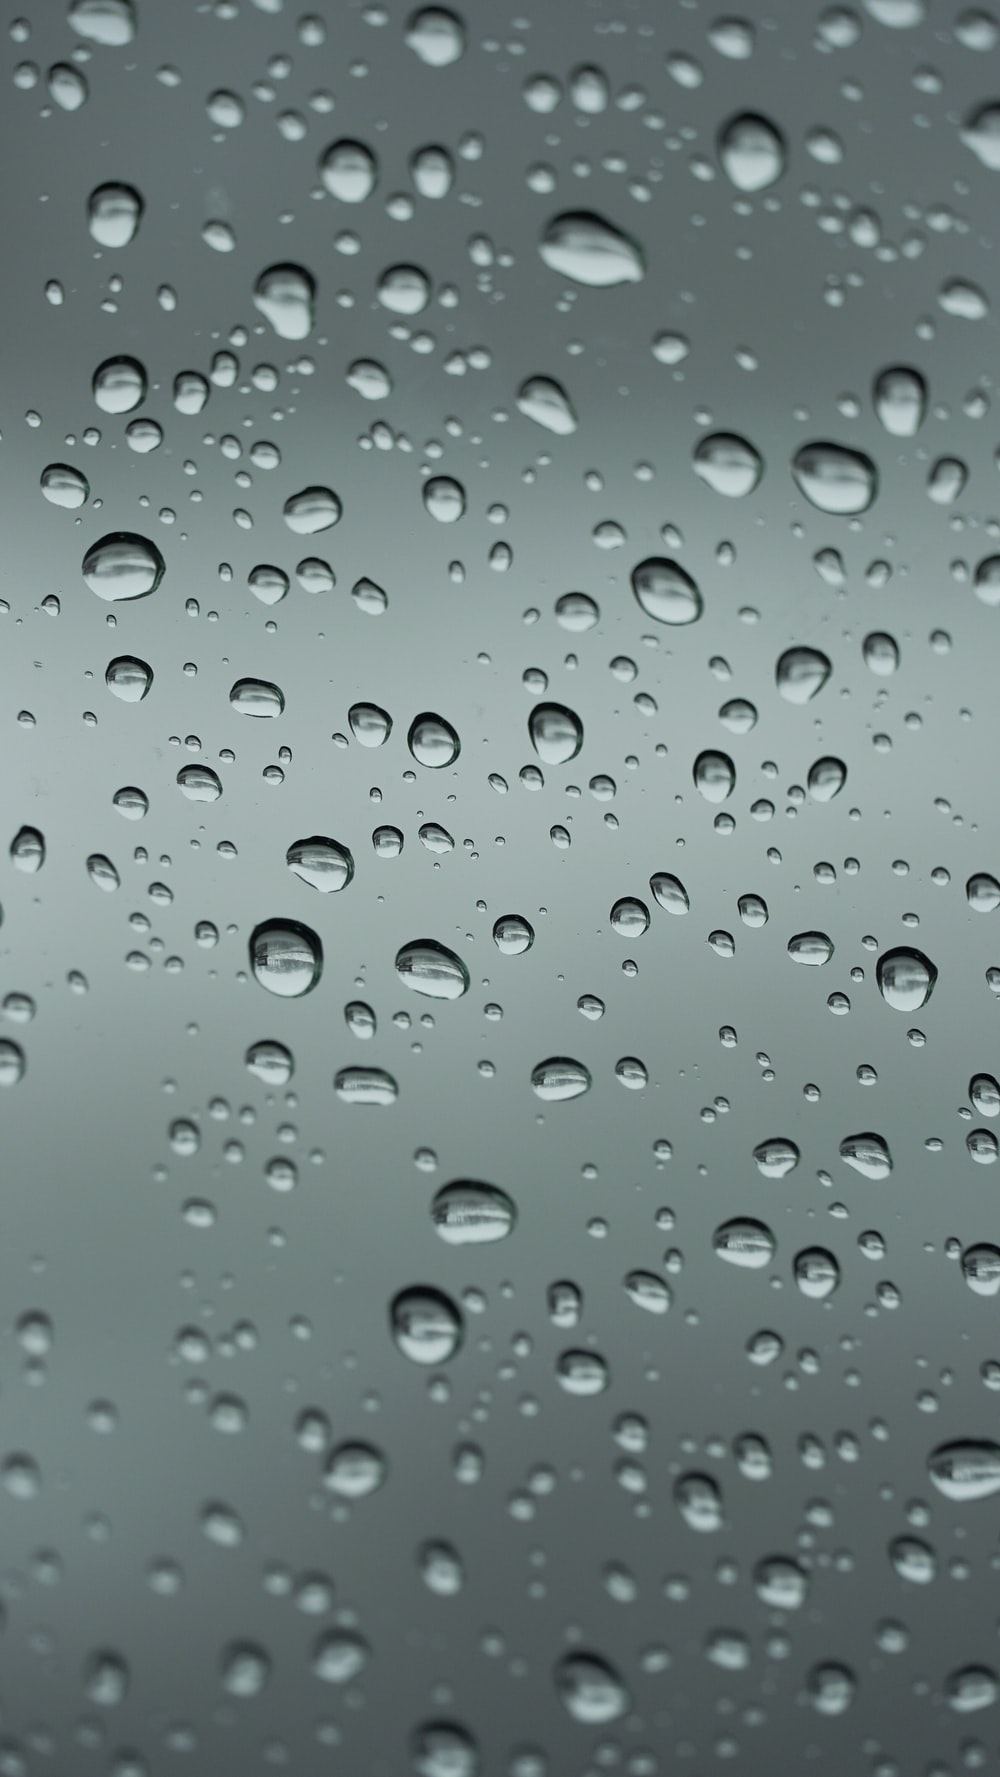 Raindrops Picture. Download Free Image